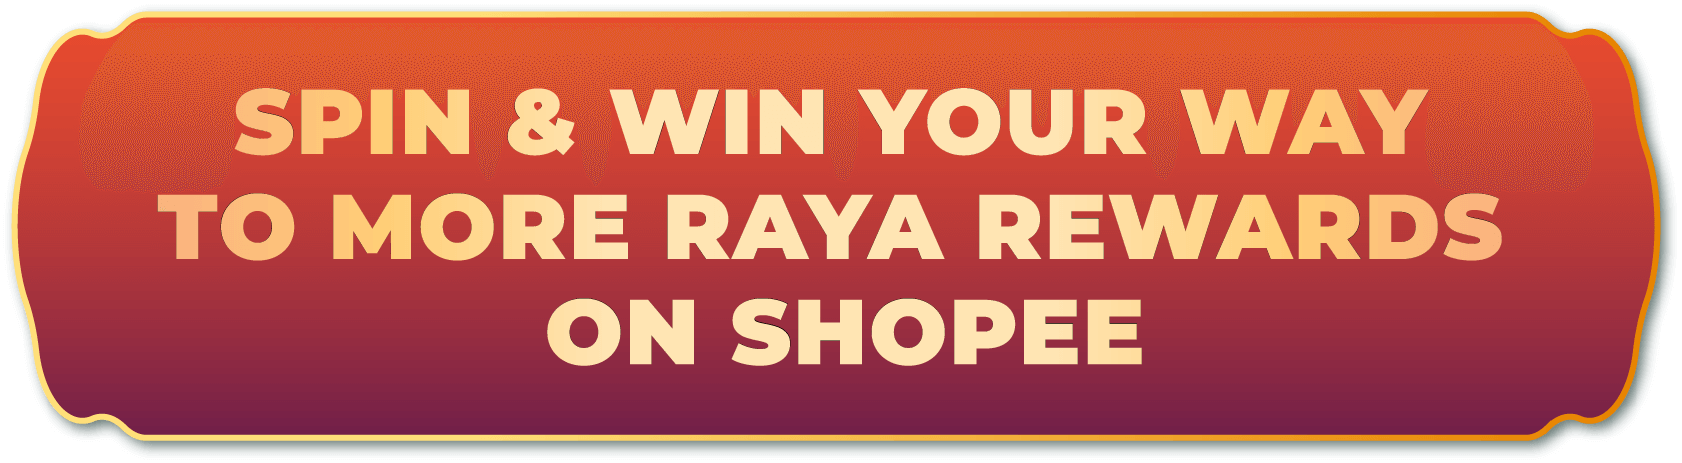 SPIN & WIN YOUR WAY TO MORE RAYA REWARDS ON SHOPEE